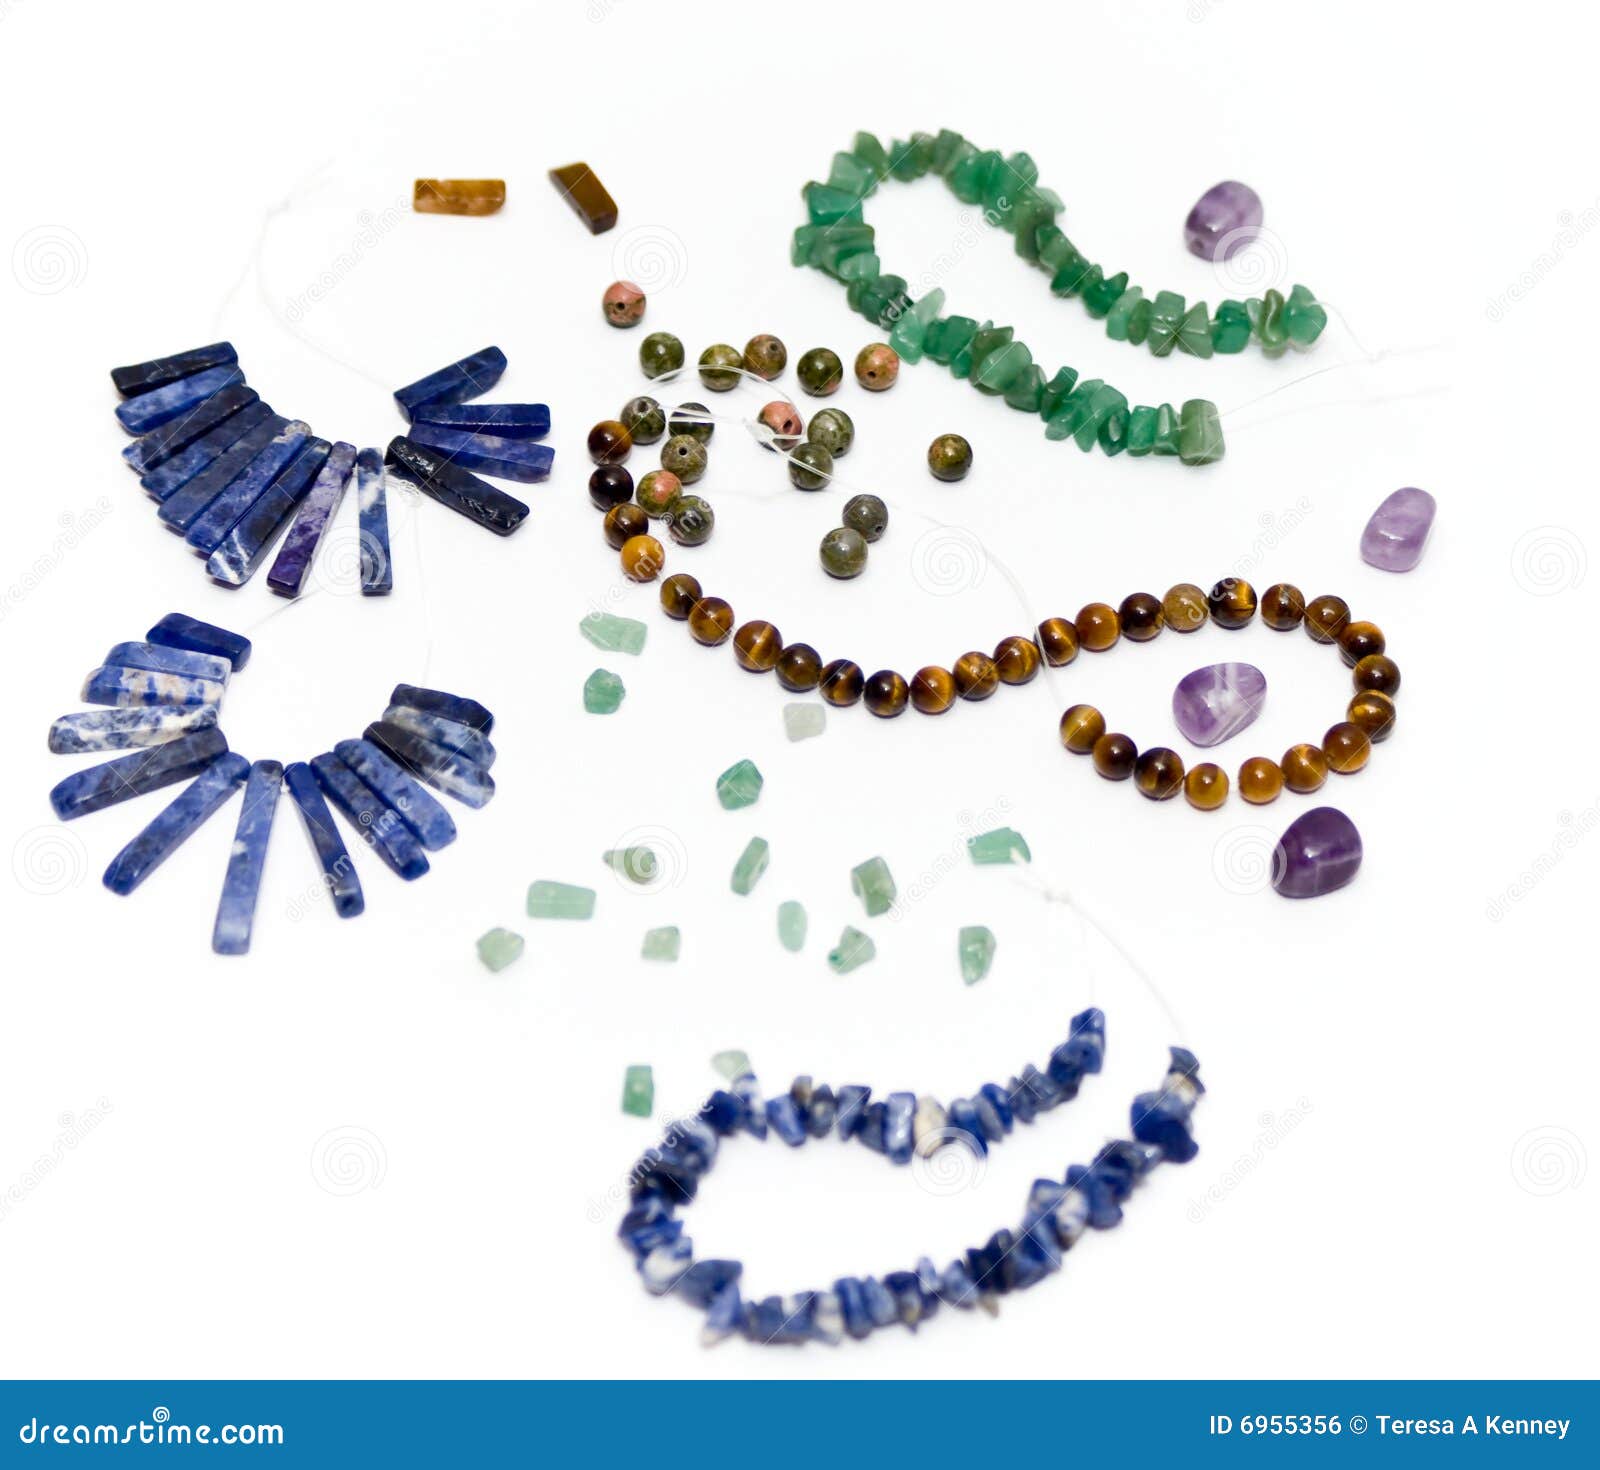 clip art for jewelry business - photo #19